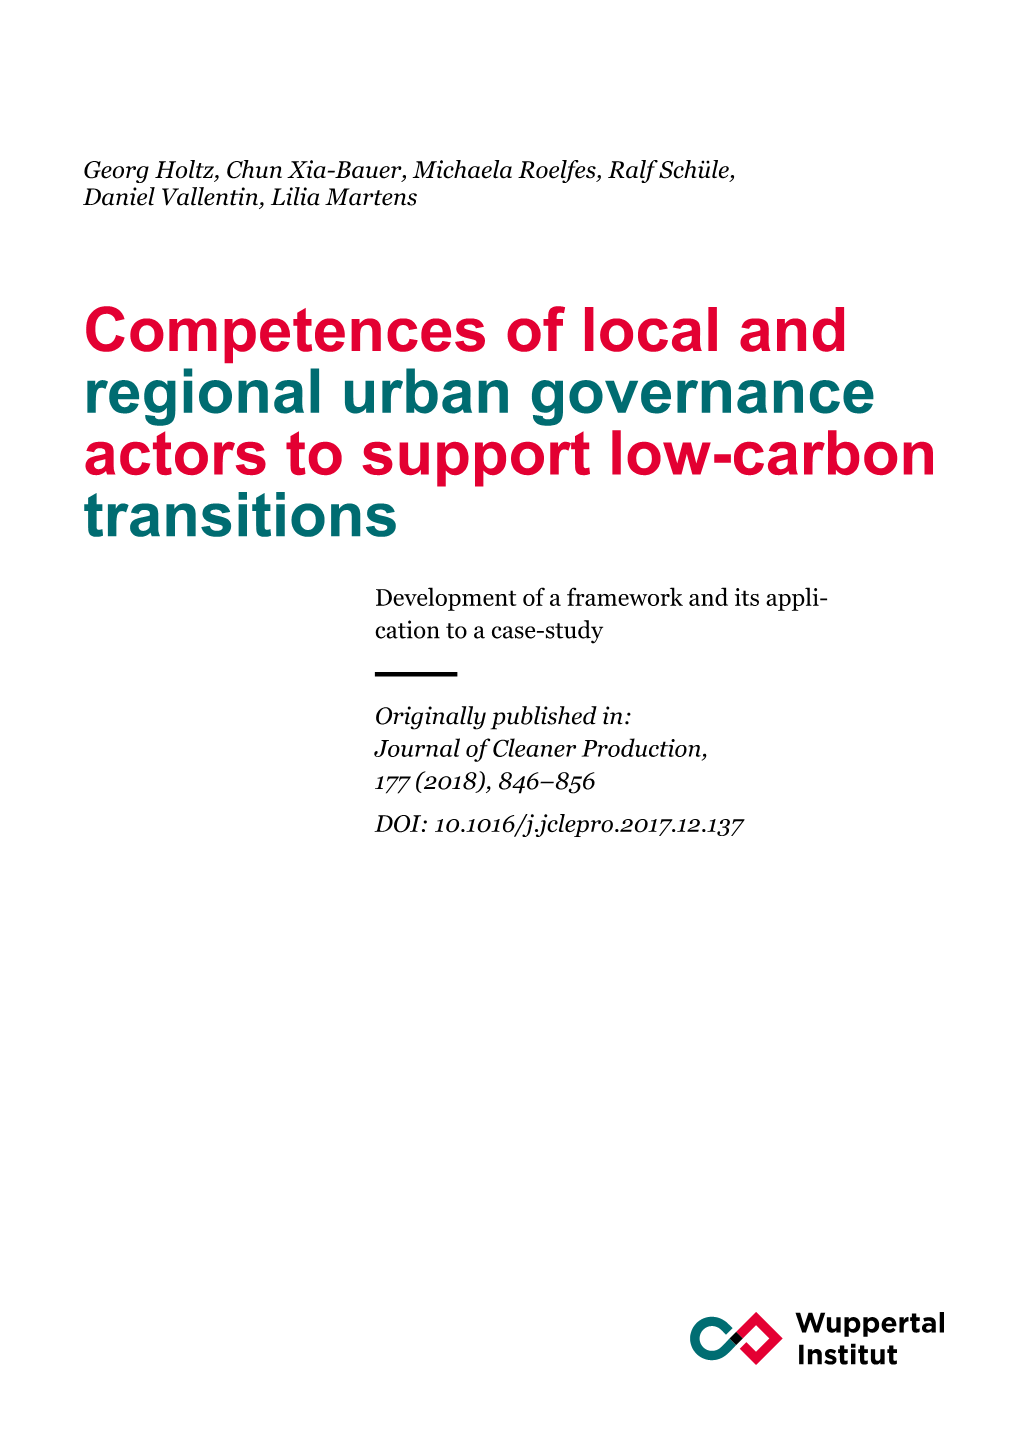 Competences of Local and Regional Urban Governance Actors to Support Low-Carbon Transitions